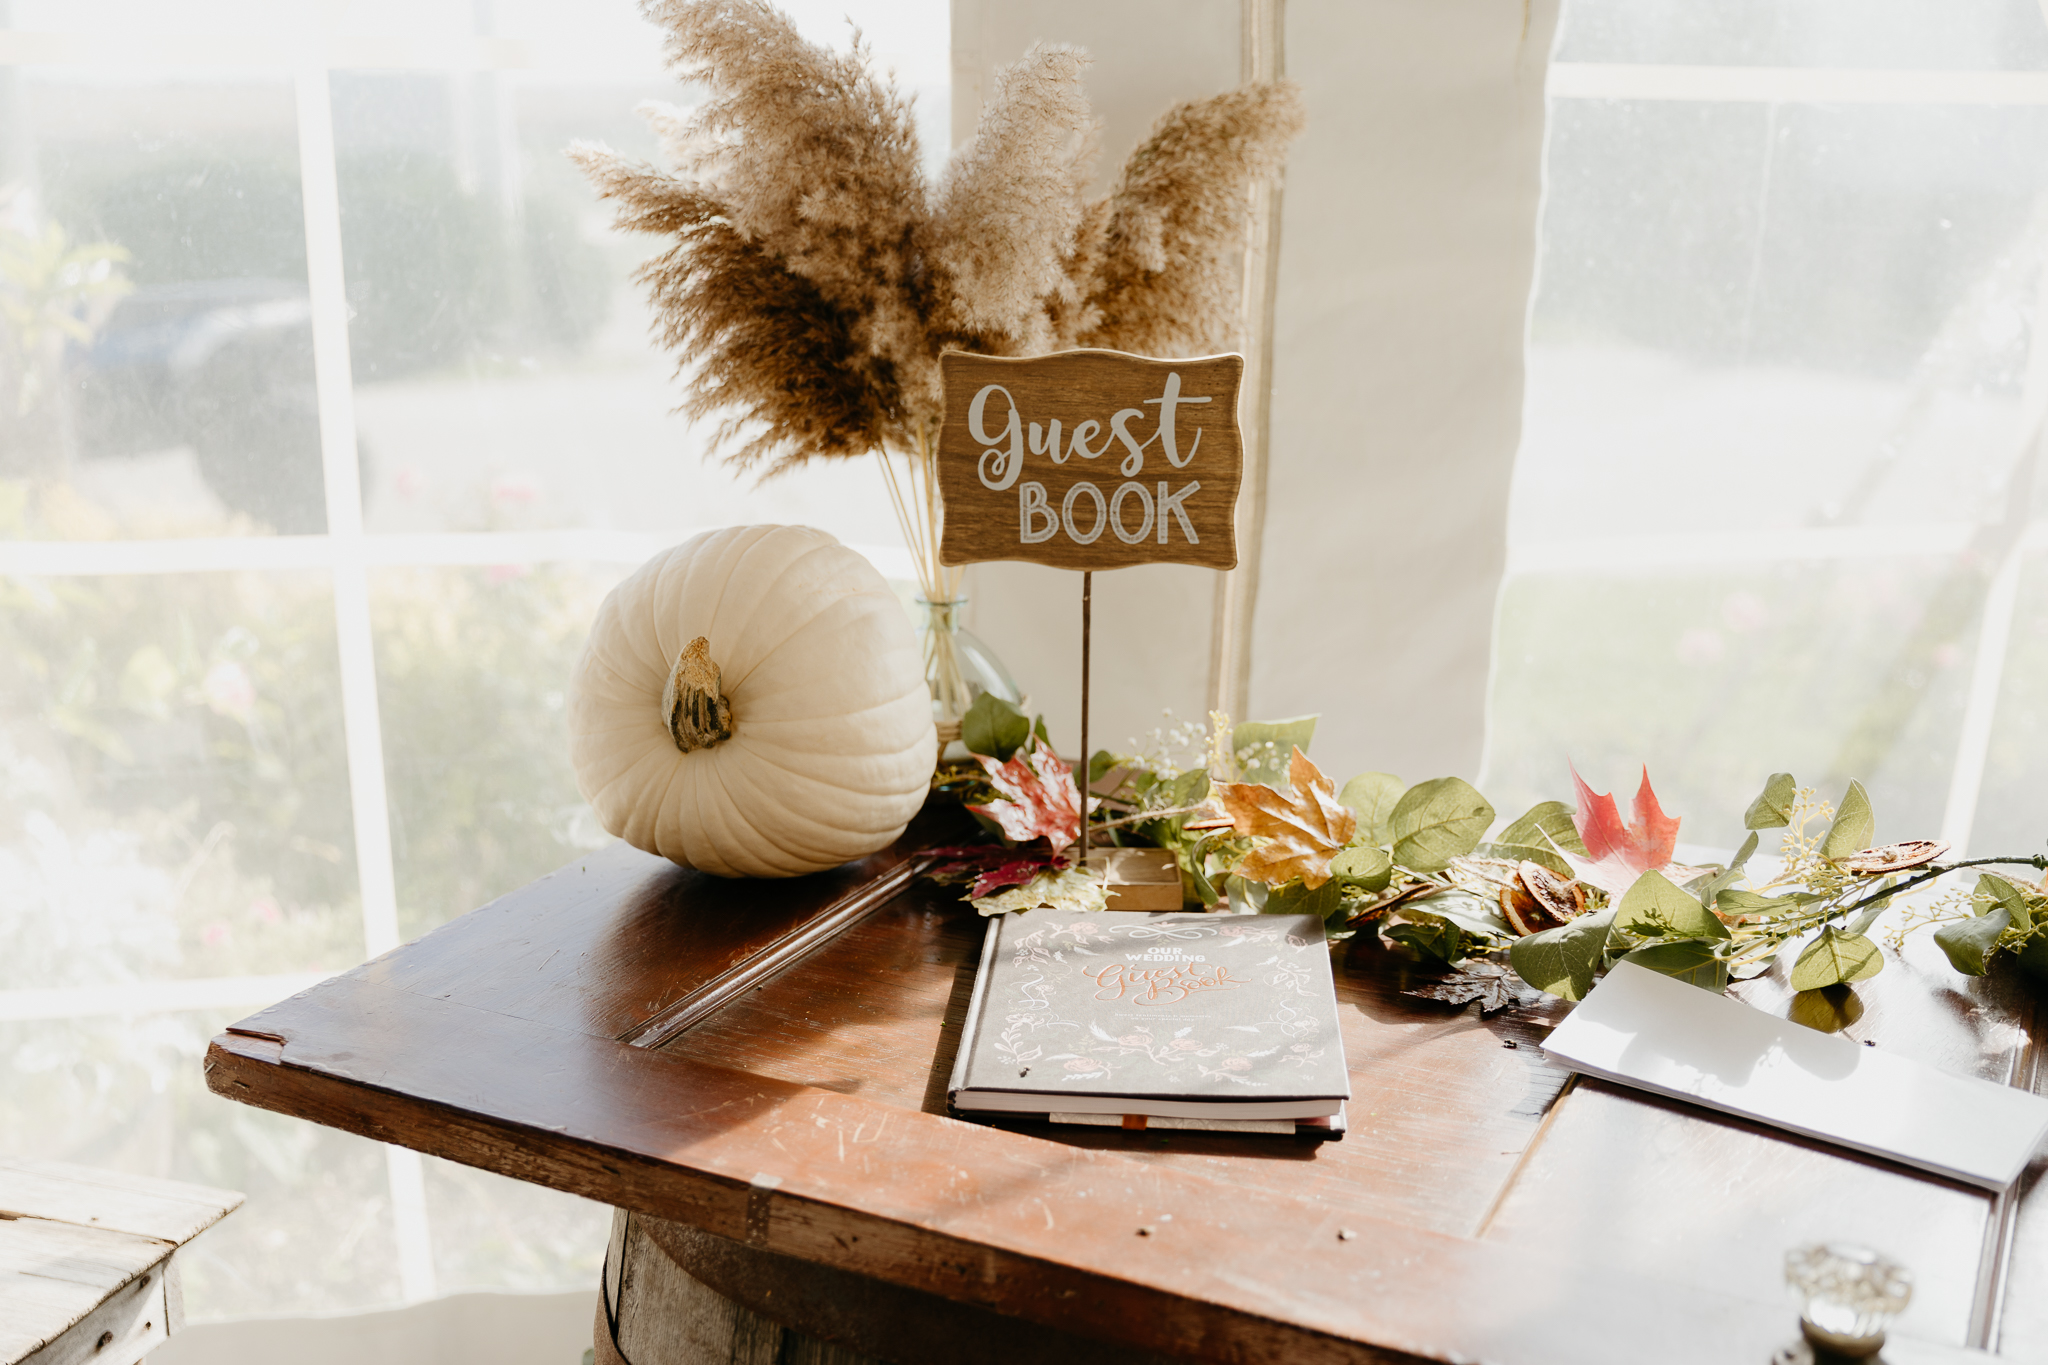 Wedding decorations and guest book on a table for a fall wedding